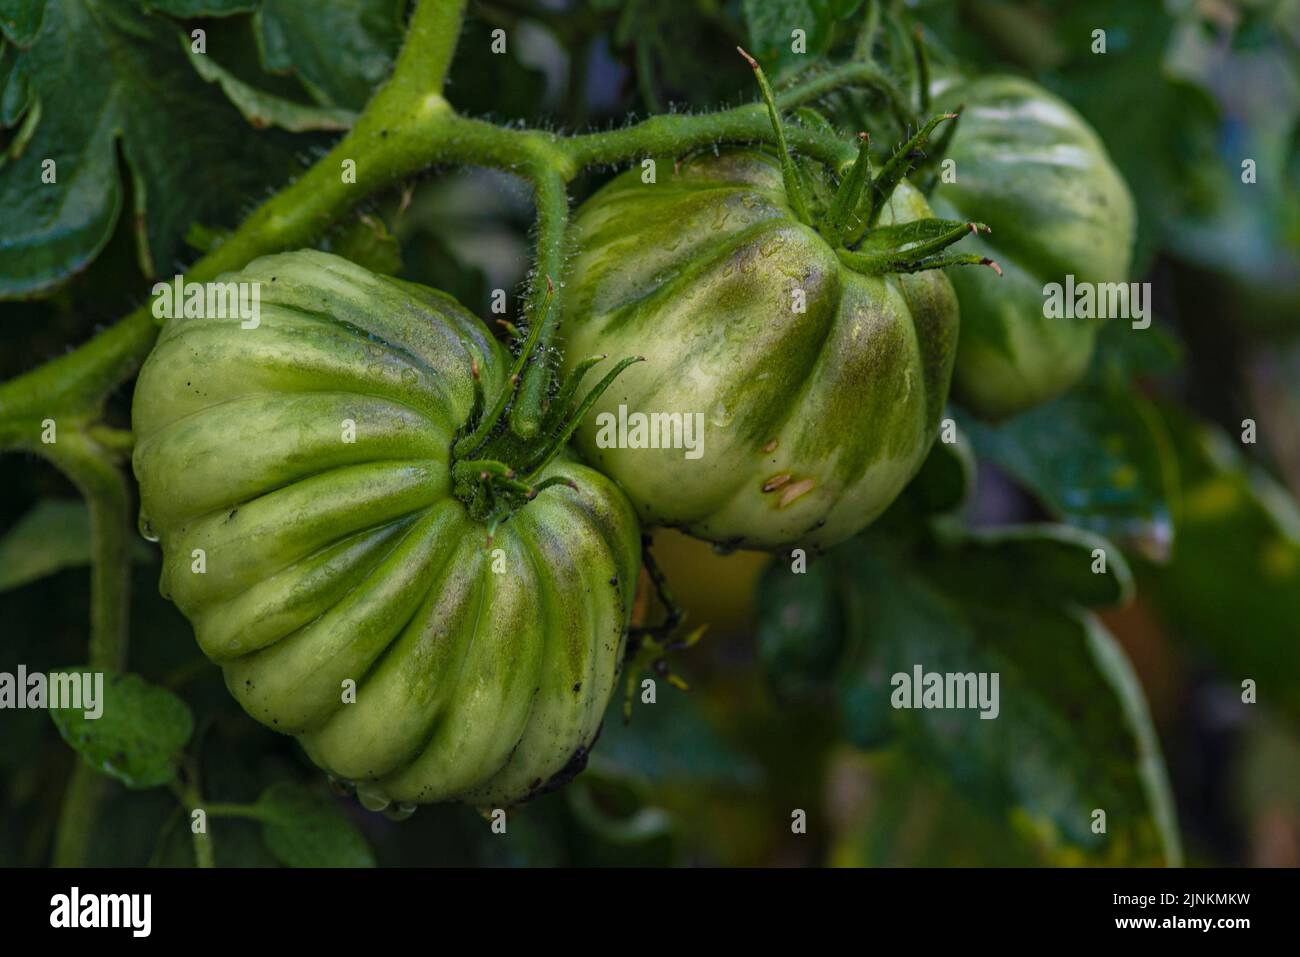 Tomato plants in greenhouse Green tomatoes plantation. Organic farming, young tomato cluster plants growth in greenhouse. concept,poster, screensaver, Stock Photo